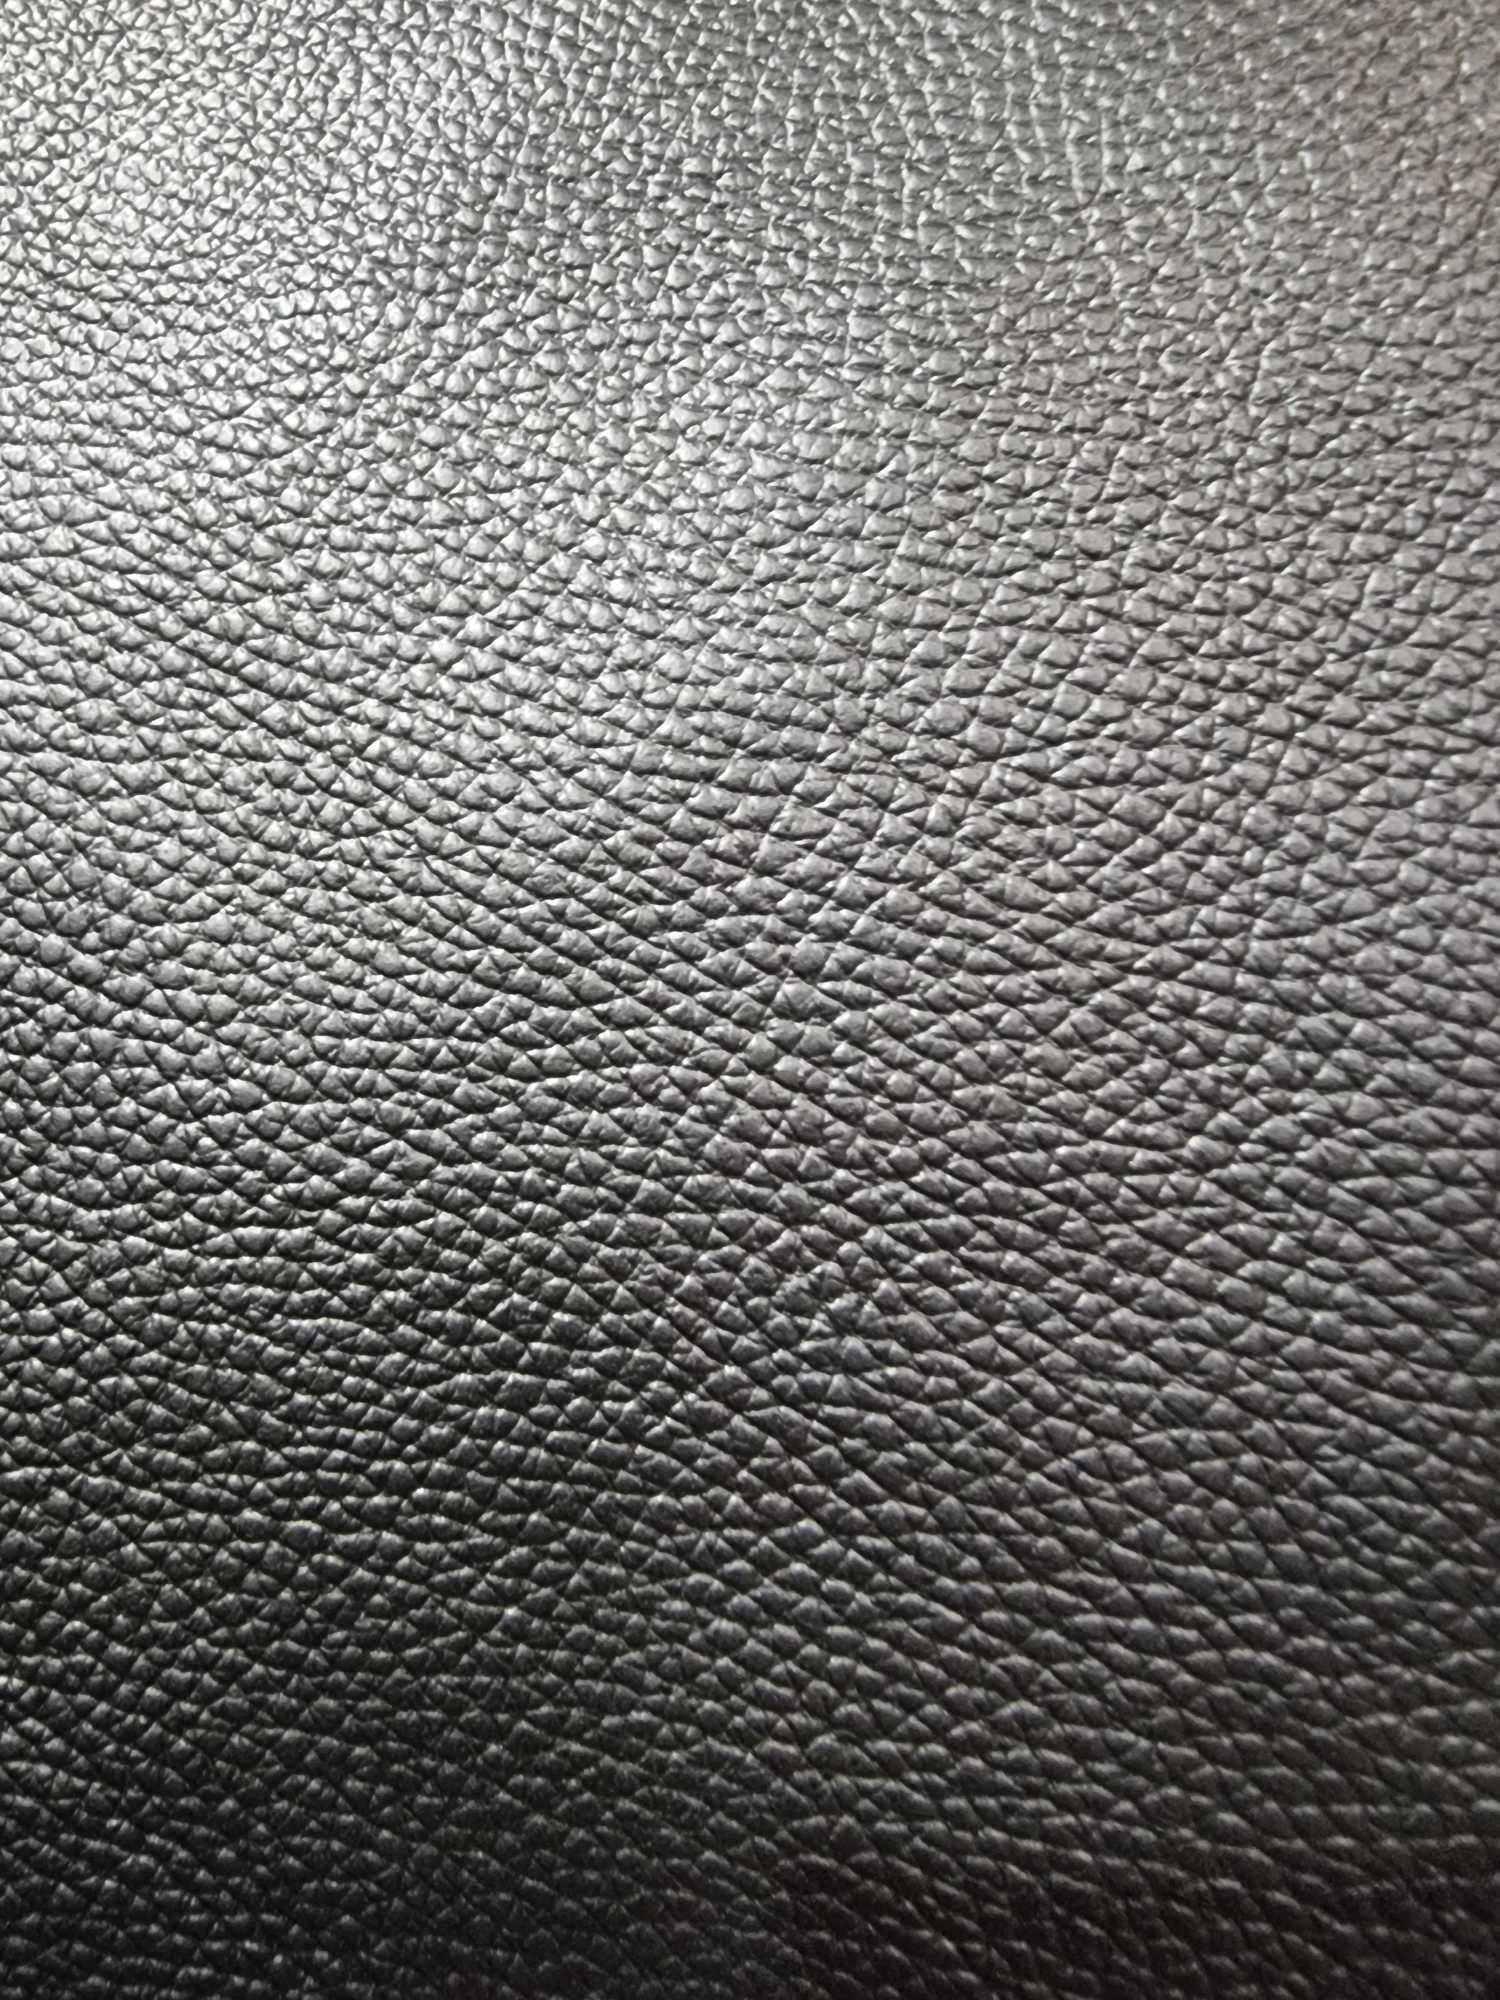 Duresta Midnight Silver Leather Hide approximately 2 4M2 2 x 1 2cm ( Hide No,254) - Image 2 of 2